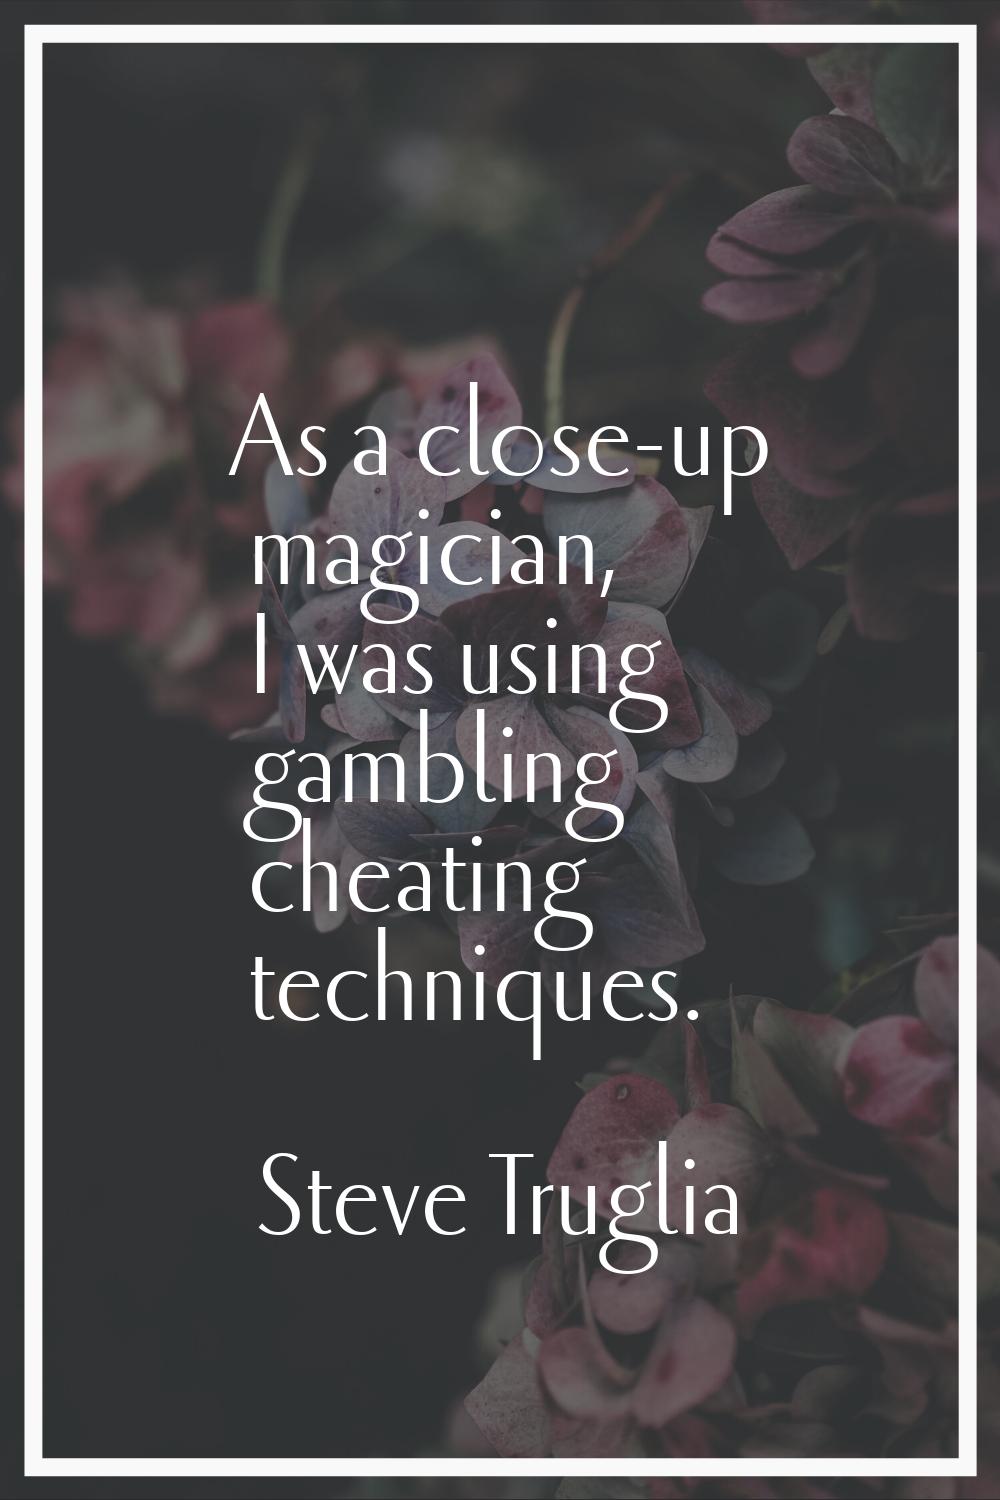 As a close-up magician, I was using gambling cheating techniques.